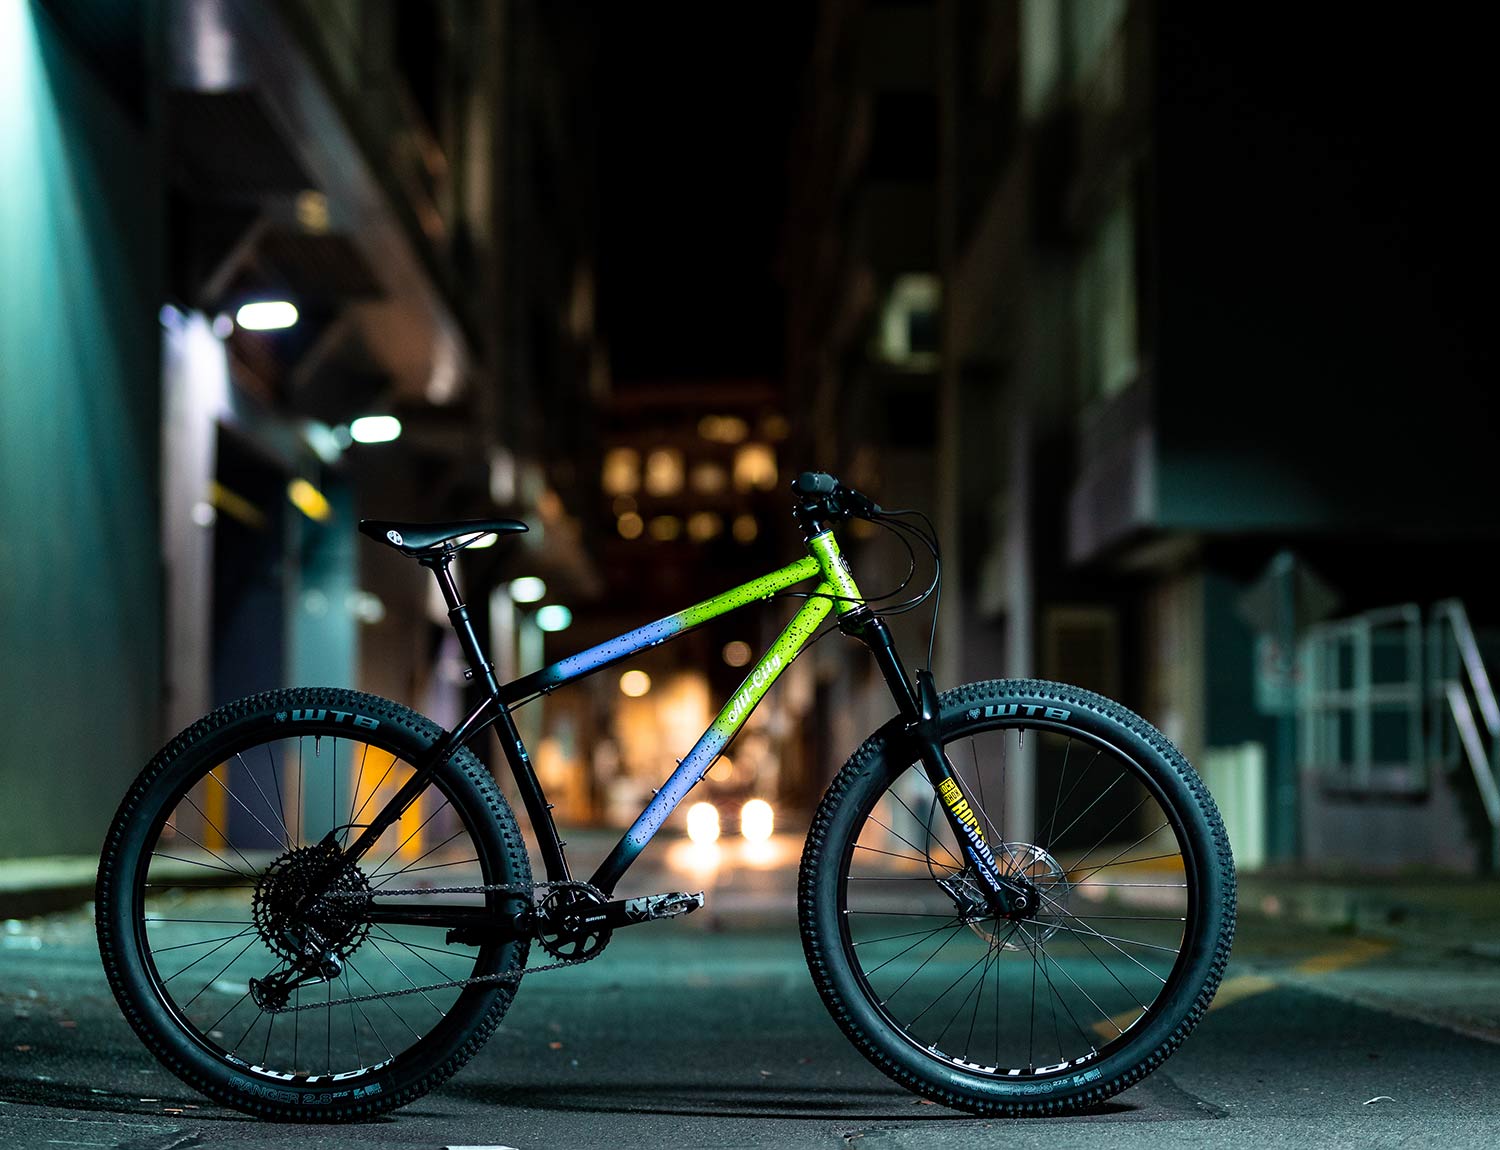 Electric queen green fade bike at night